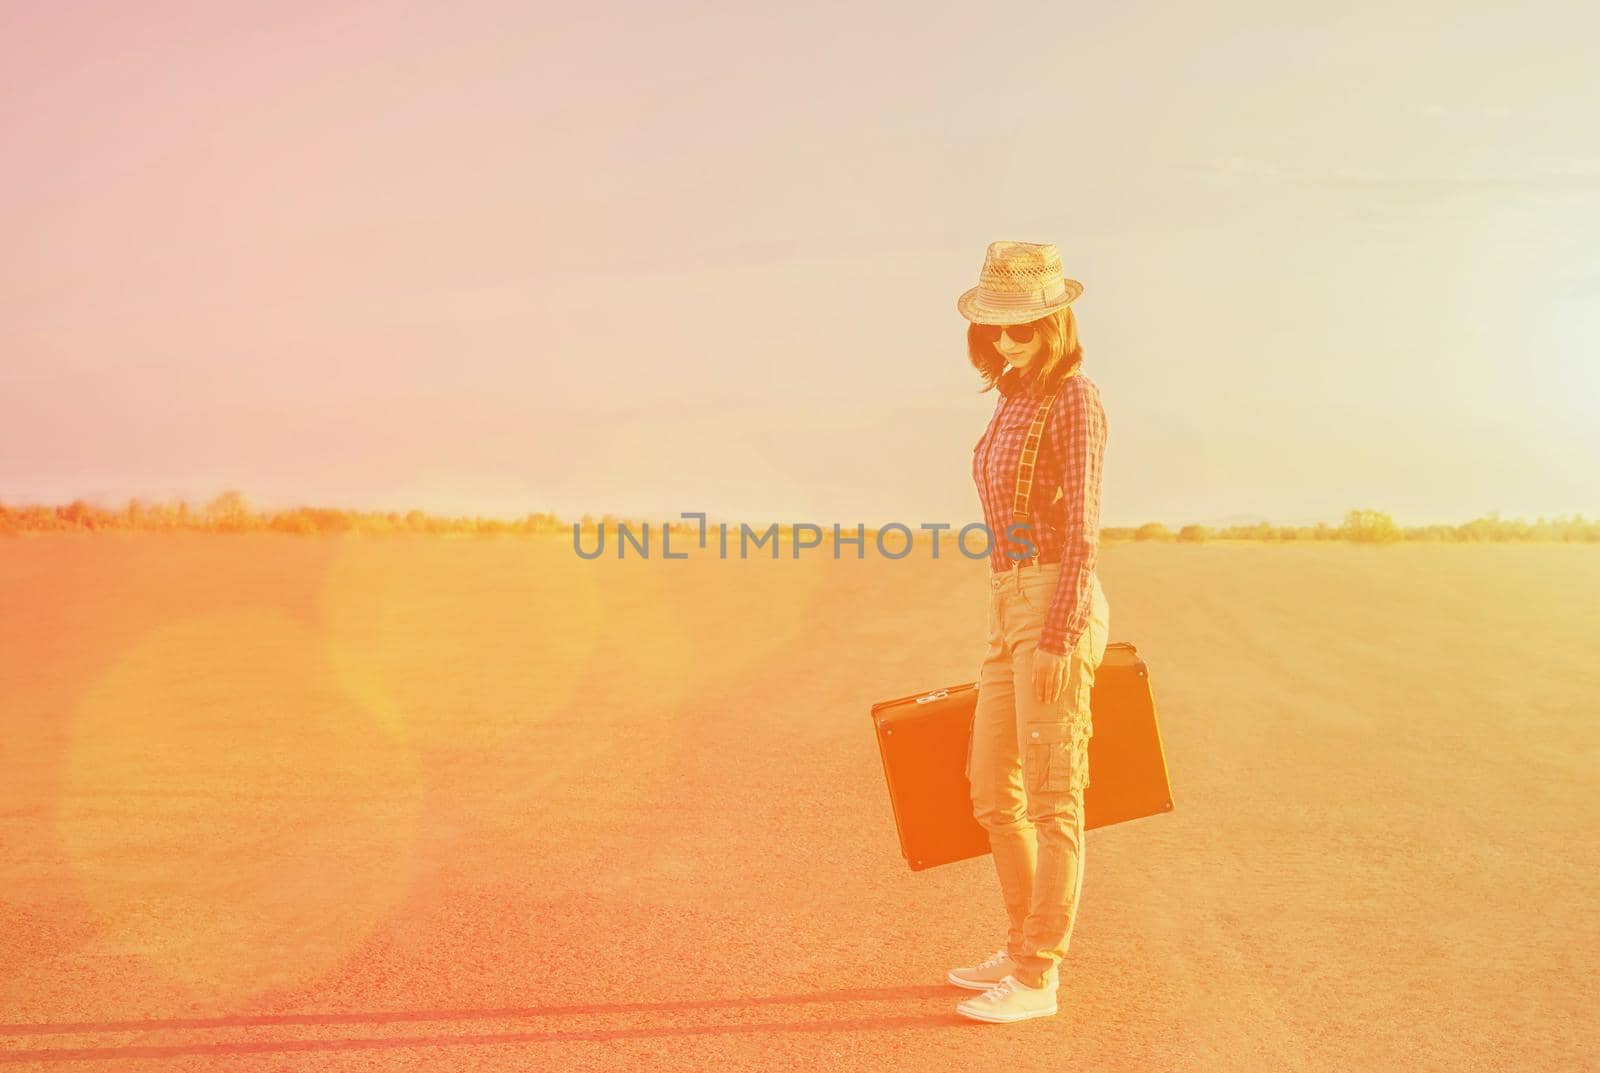 Traveler young woman in hat and sunglasses standing with a suitcase on road in summer. Image with sunlight effect